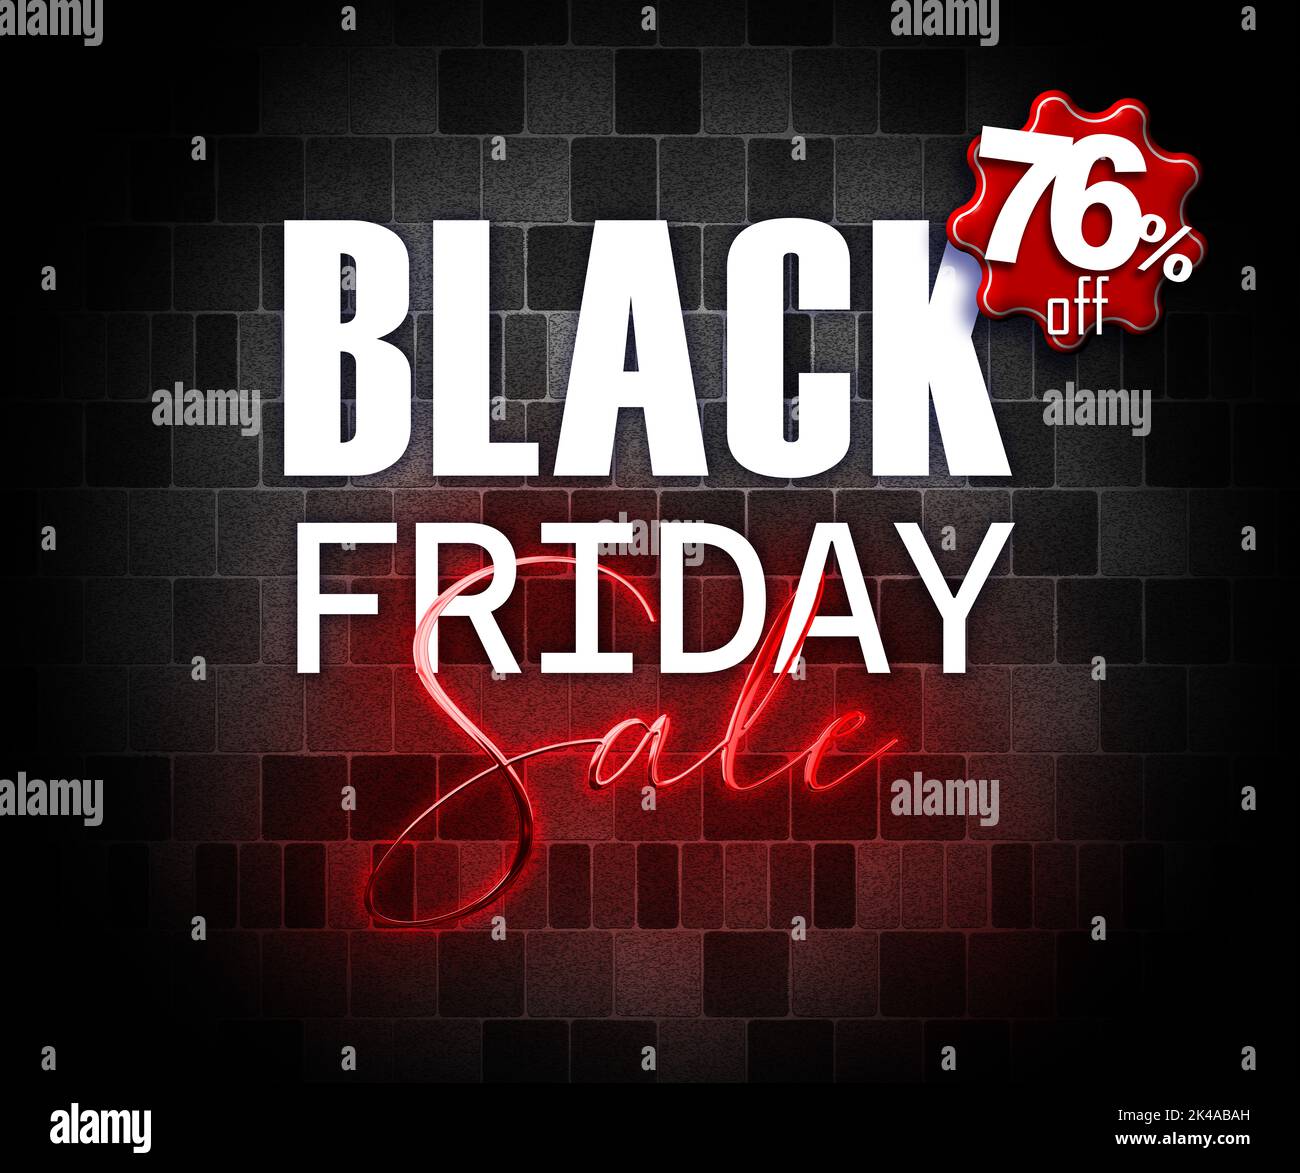 illustration with 3d elements black friday promotion banner 76 percent off sales increase Stock Photo